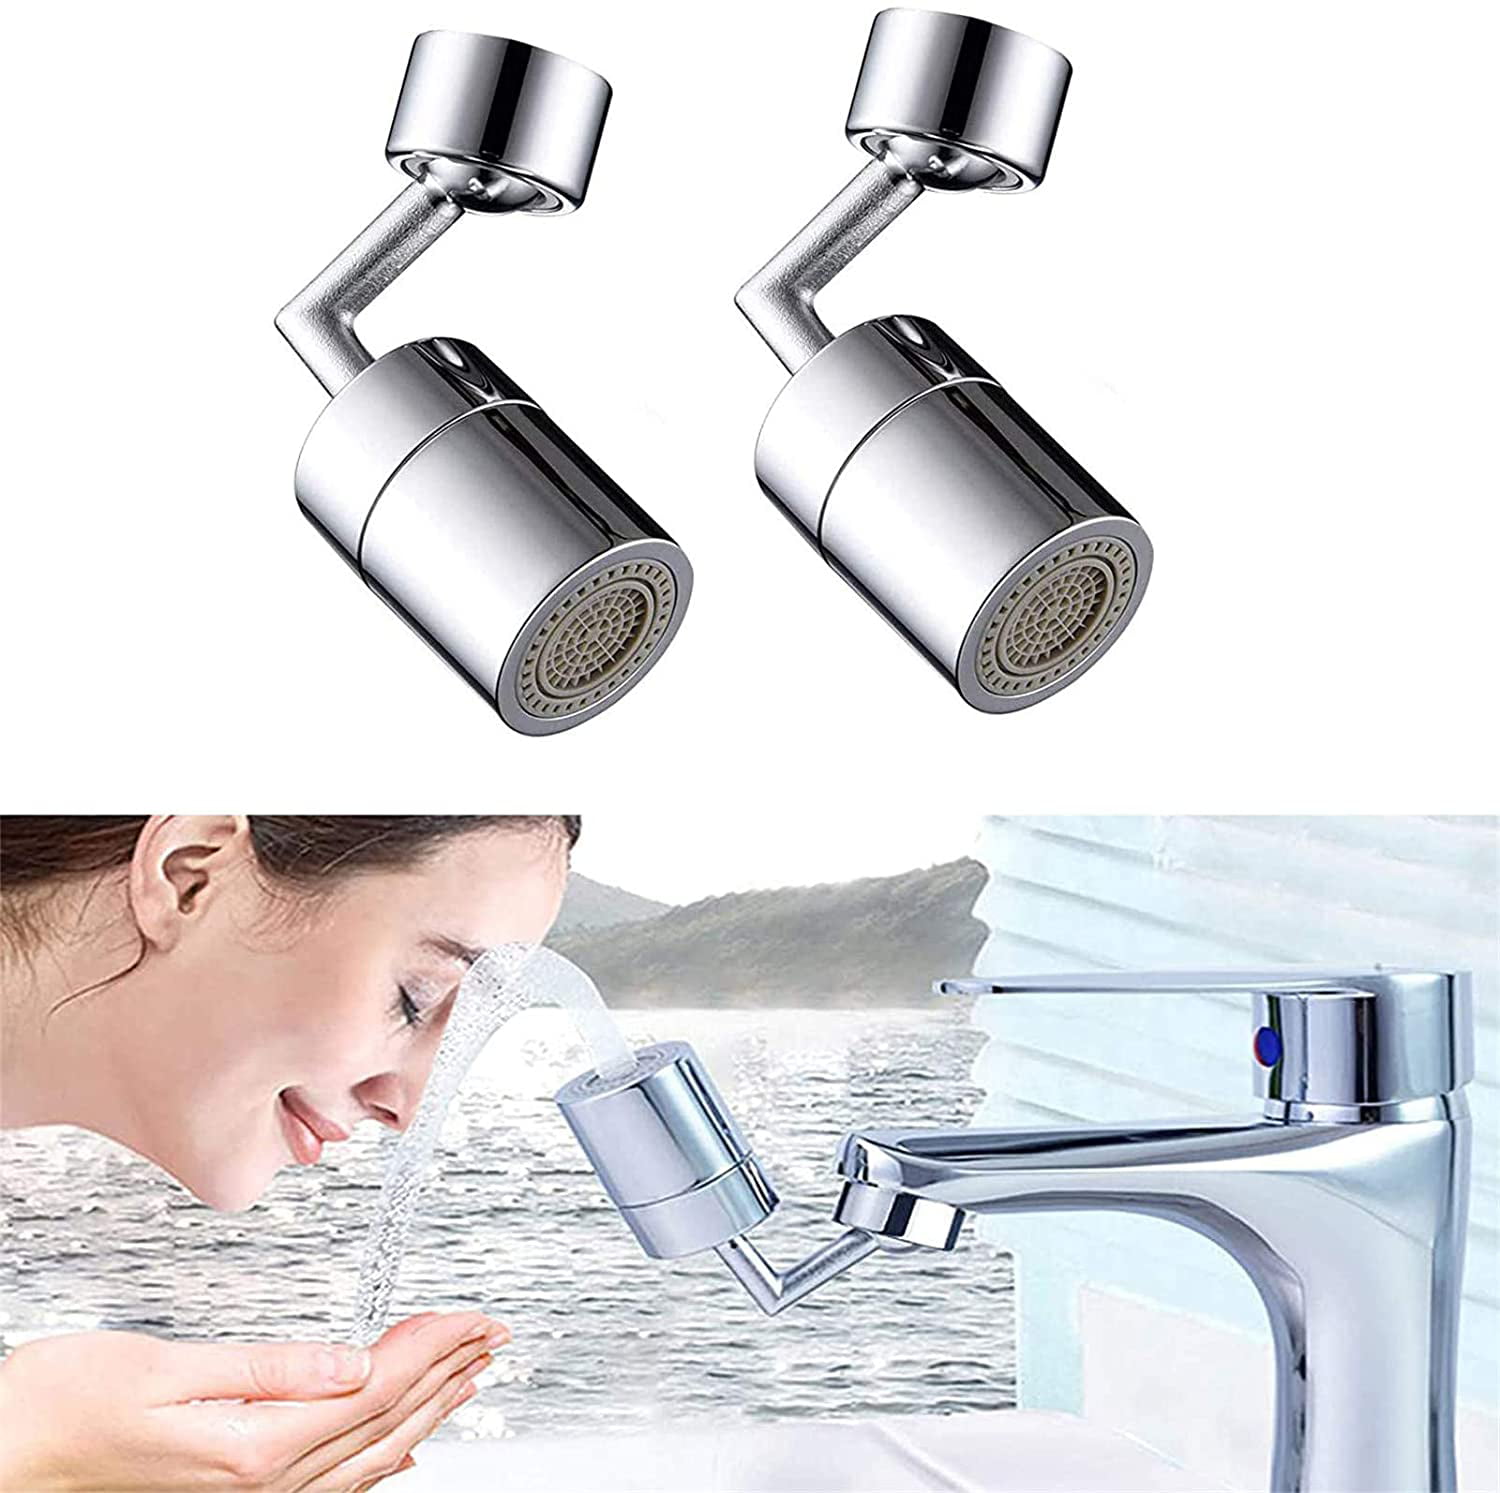 Universal Basin Lengthen Extender Rotatable Splash Water Filter Nozzle Tap Head with 2 Water Outlet Modes 720 Degree Swivel Movable Universal Water Tap 